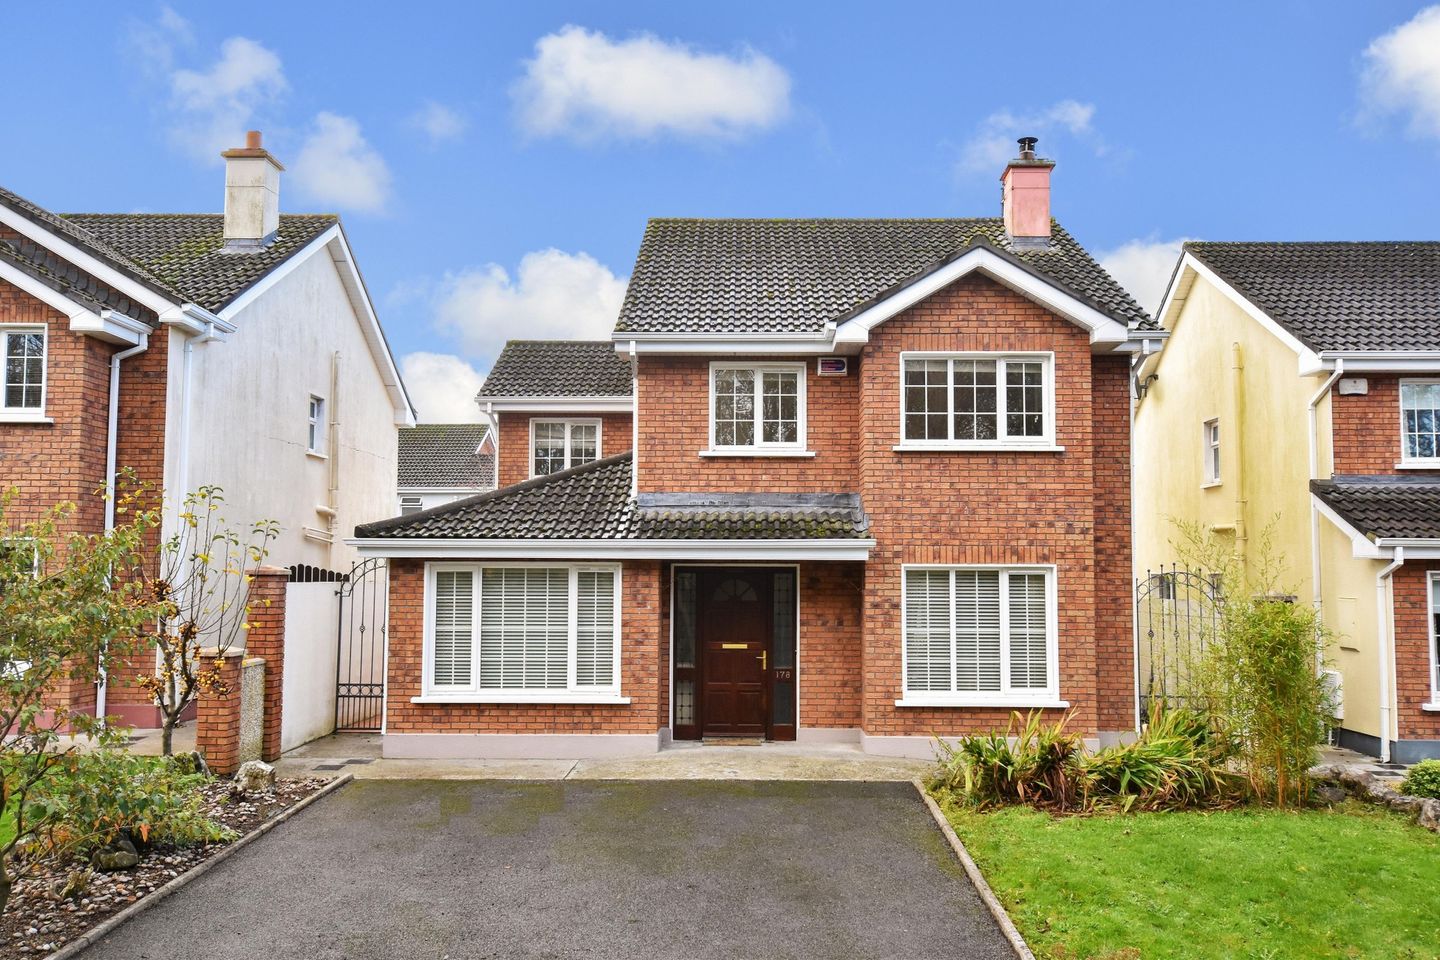 178 Bluebell Woods, Oranmore, Co. Galway